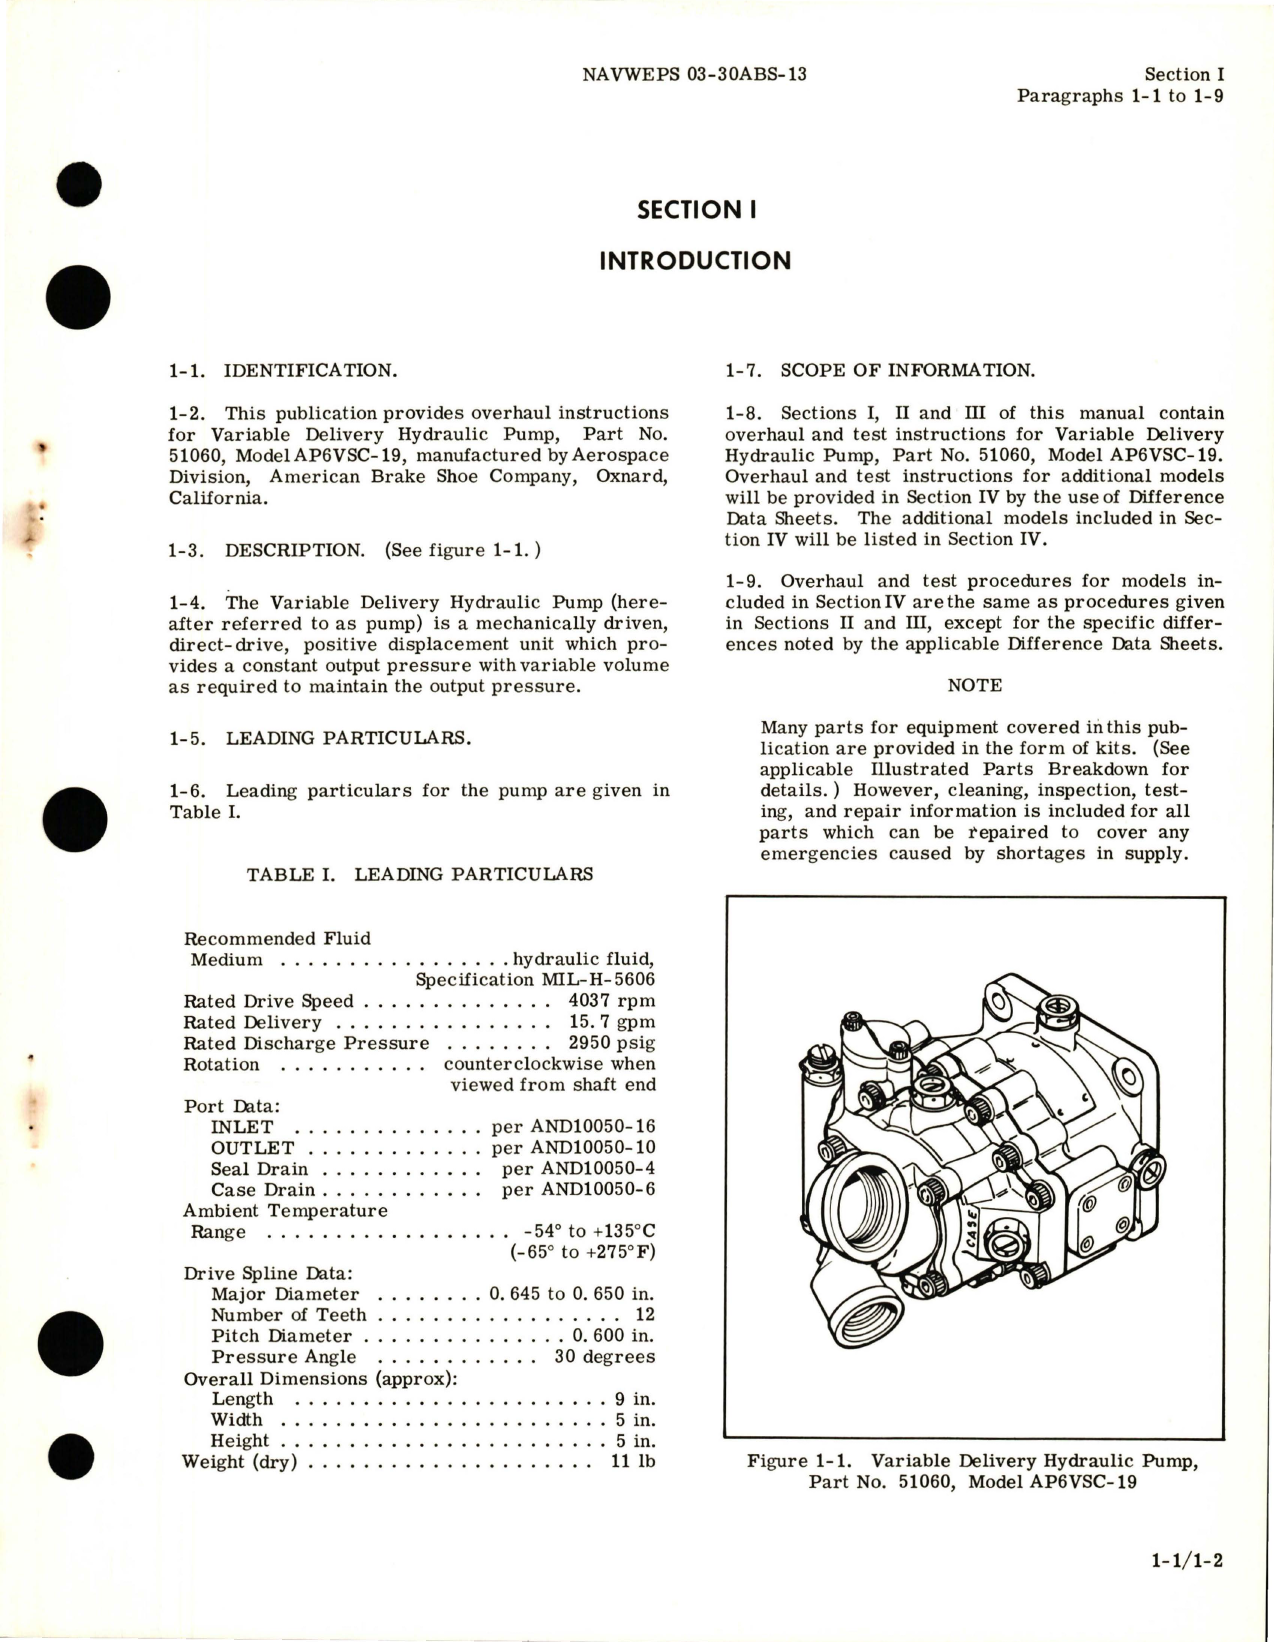 Sample page 5 from AirCorps Library document: Overhaul Instructions for Variable Delivery Hydraulic Pump - Part 51060 - Model AP6VSC-19